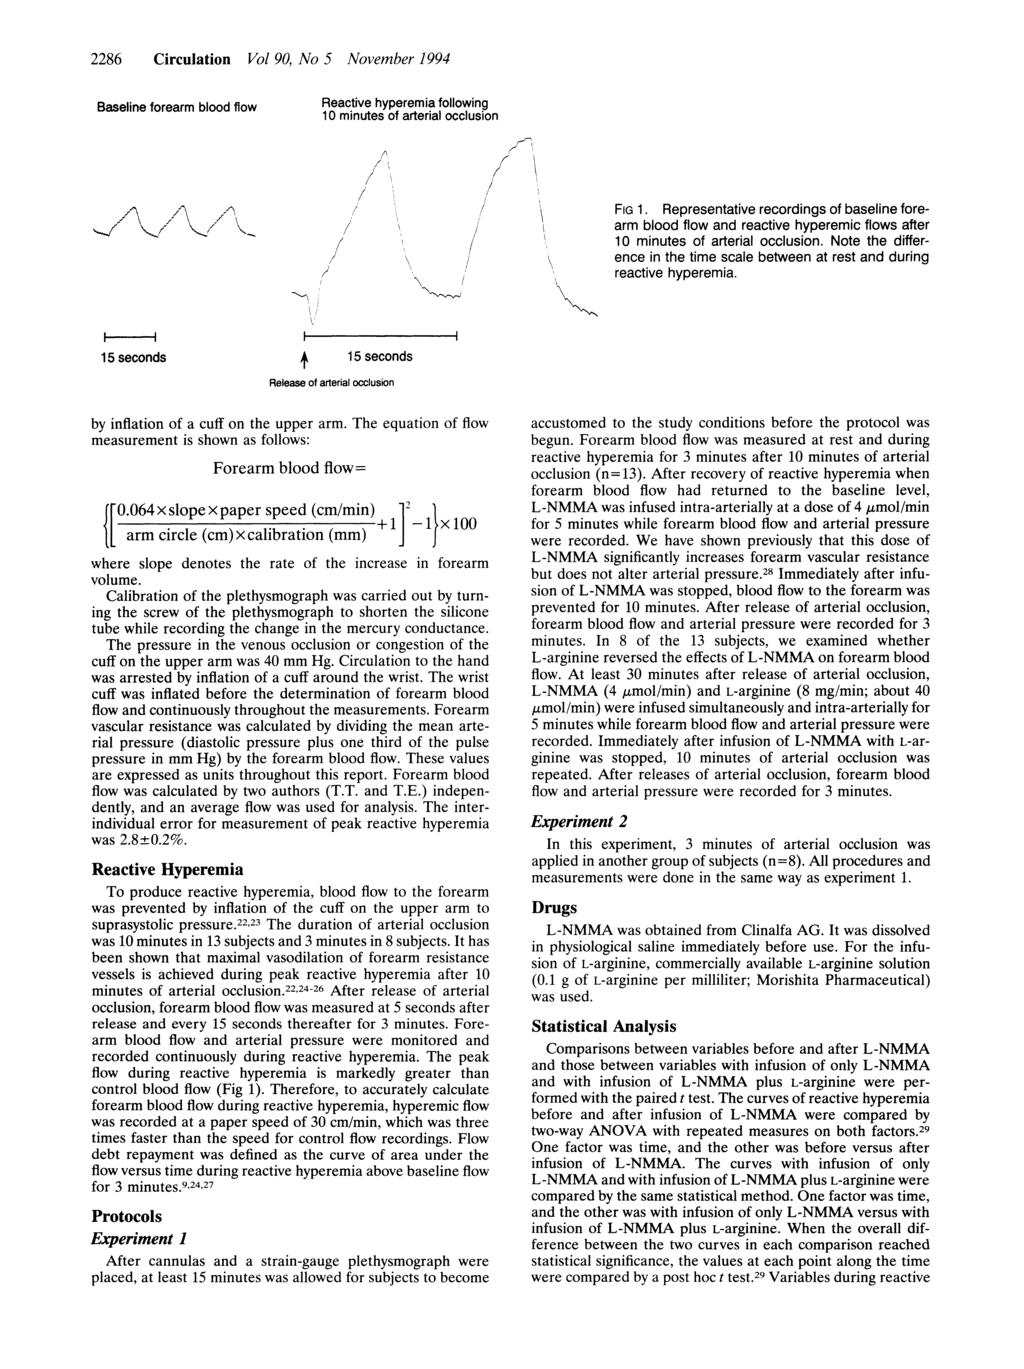 2286 Circulation Vol 90, No 5 November 1994 Baseline forearm blood flow Reactive hyperemia following 10 minutes of arterial occlusion /! FIG 1.